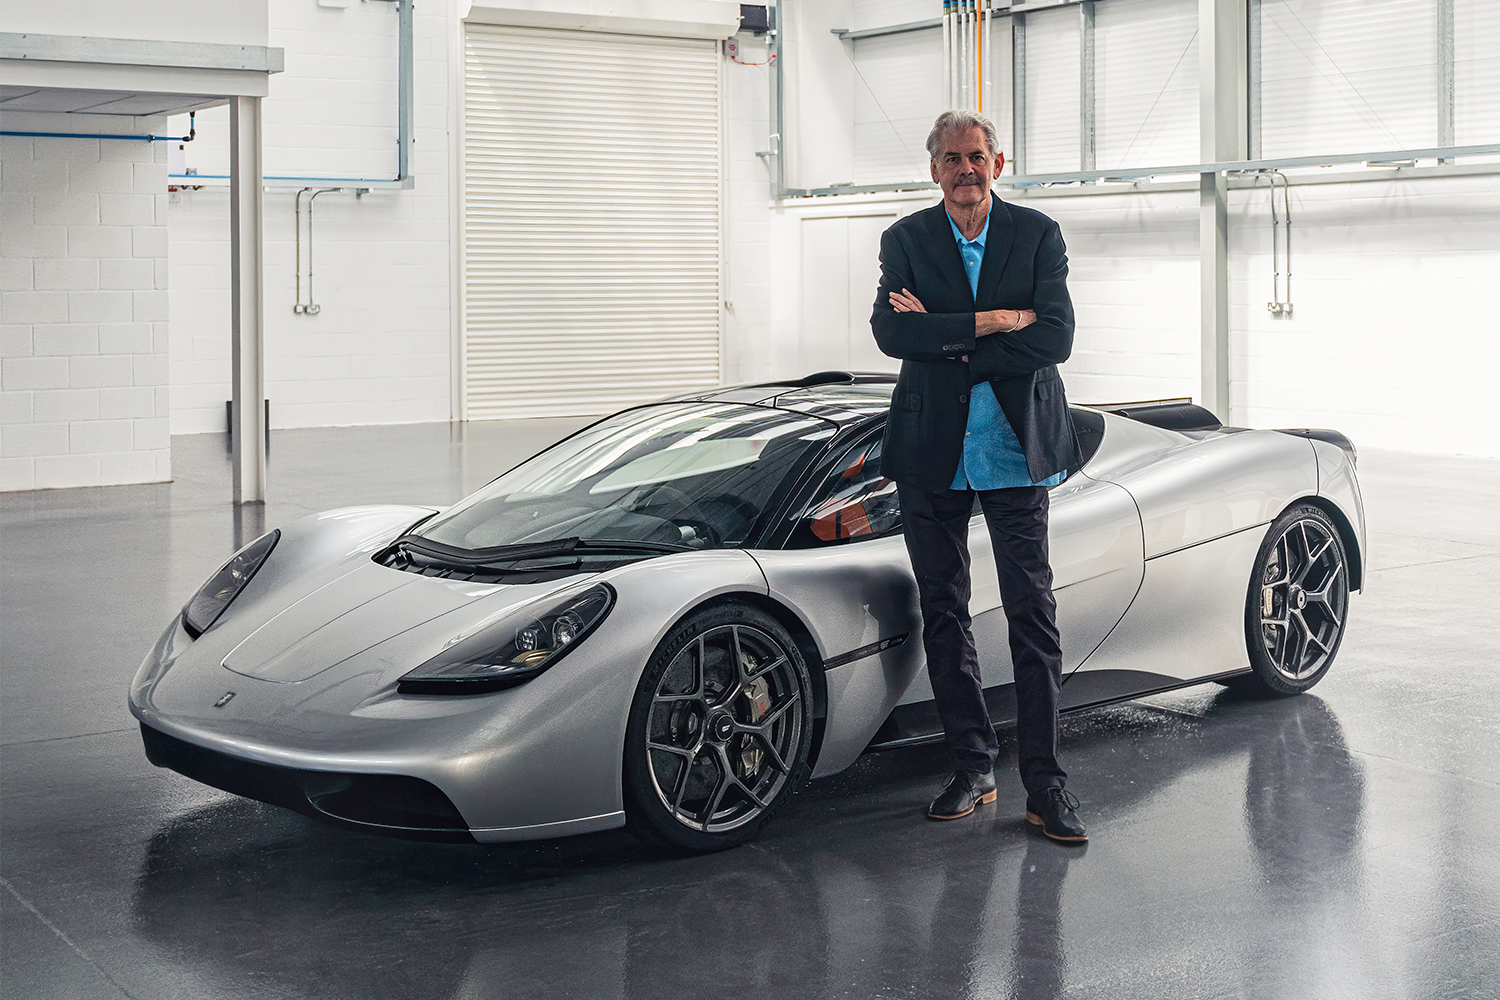 Gordon Murray standing next to his new supercar the T.50